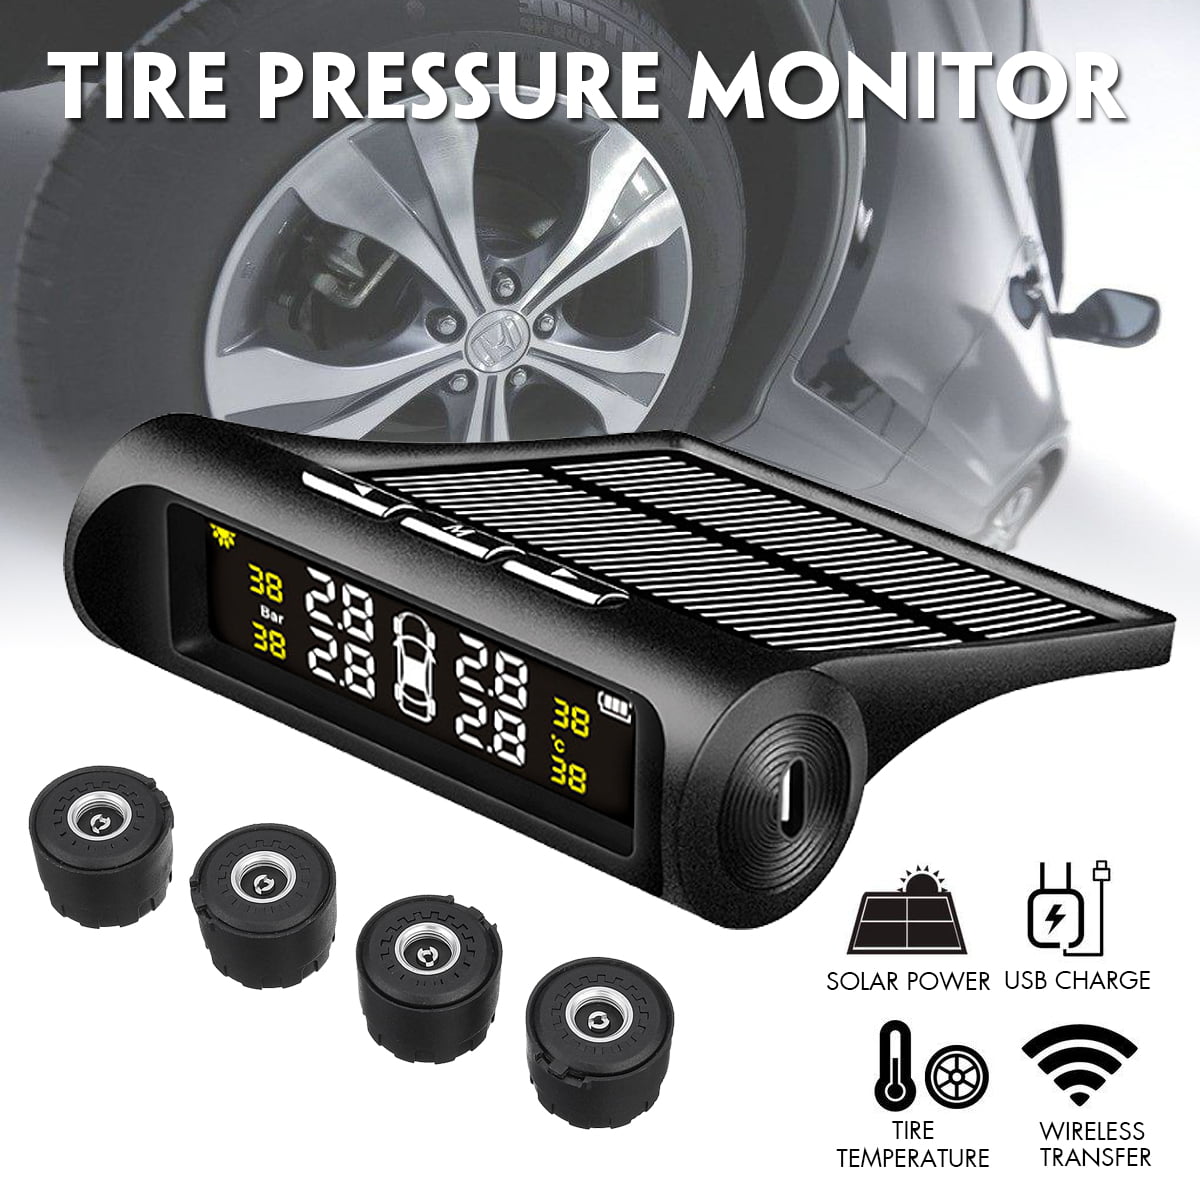 Temperature and Alarm Function Solar Universal Car Alarm System with 4 External Sensors Real-time Displays 4 Tires Pressure PerfectPromise TPMS Wireless Tire Pressure Monitoring System 